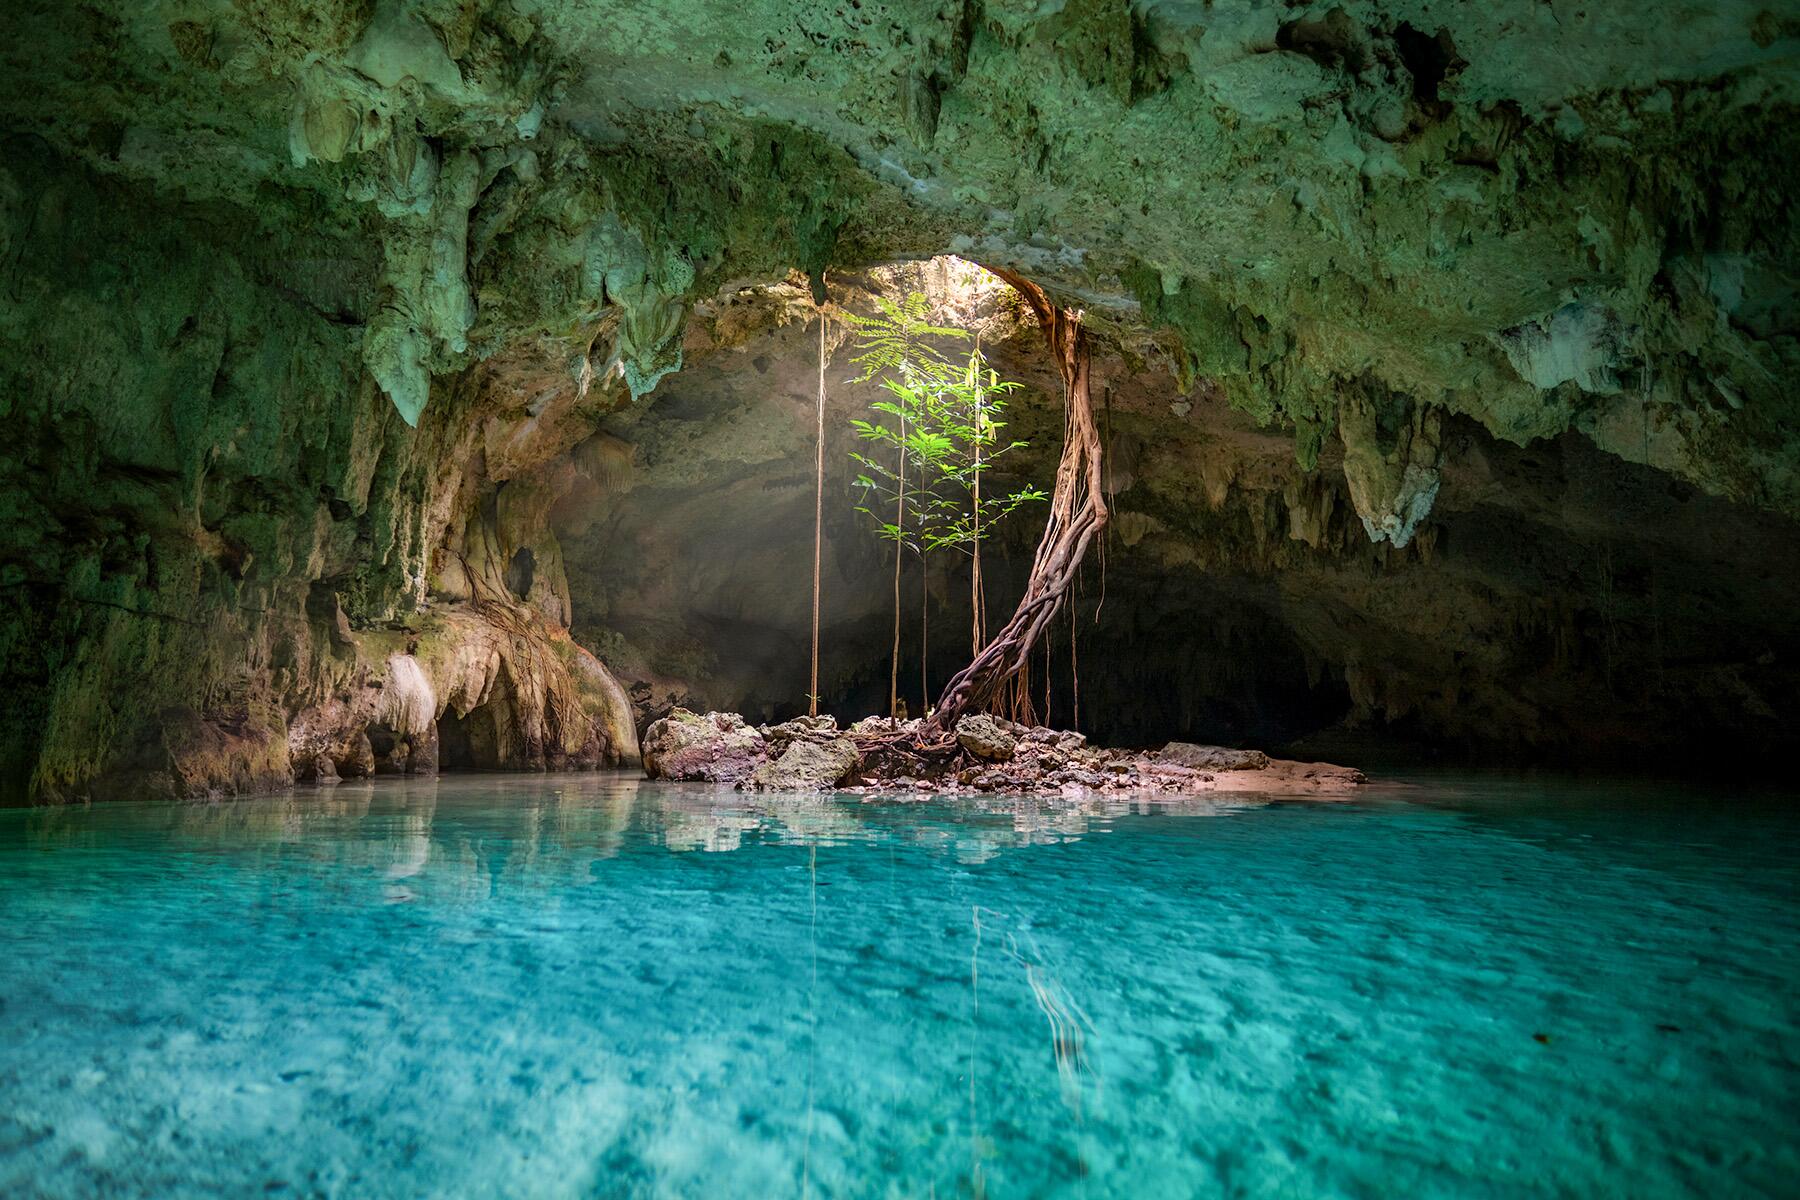 <a href='https://www.fodors.com/world/mexico-and-central-america/mexico/the-riviera-maya/experiences/news/photos/best-cenotes-to-visit-in-riviera-maya#'>From &quot;The 10 Most Magical Cenotes in the Riviera Maya: Cenote Calavera&quot;</a>